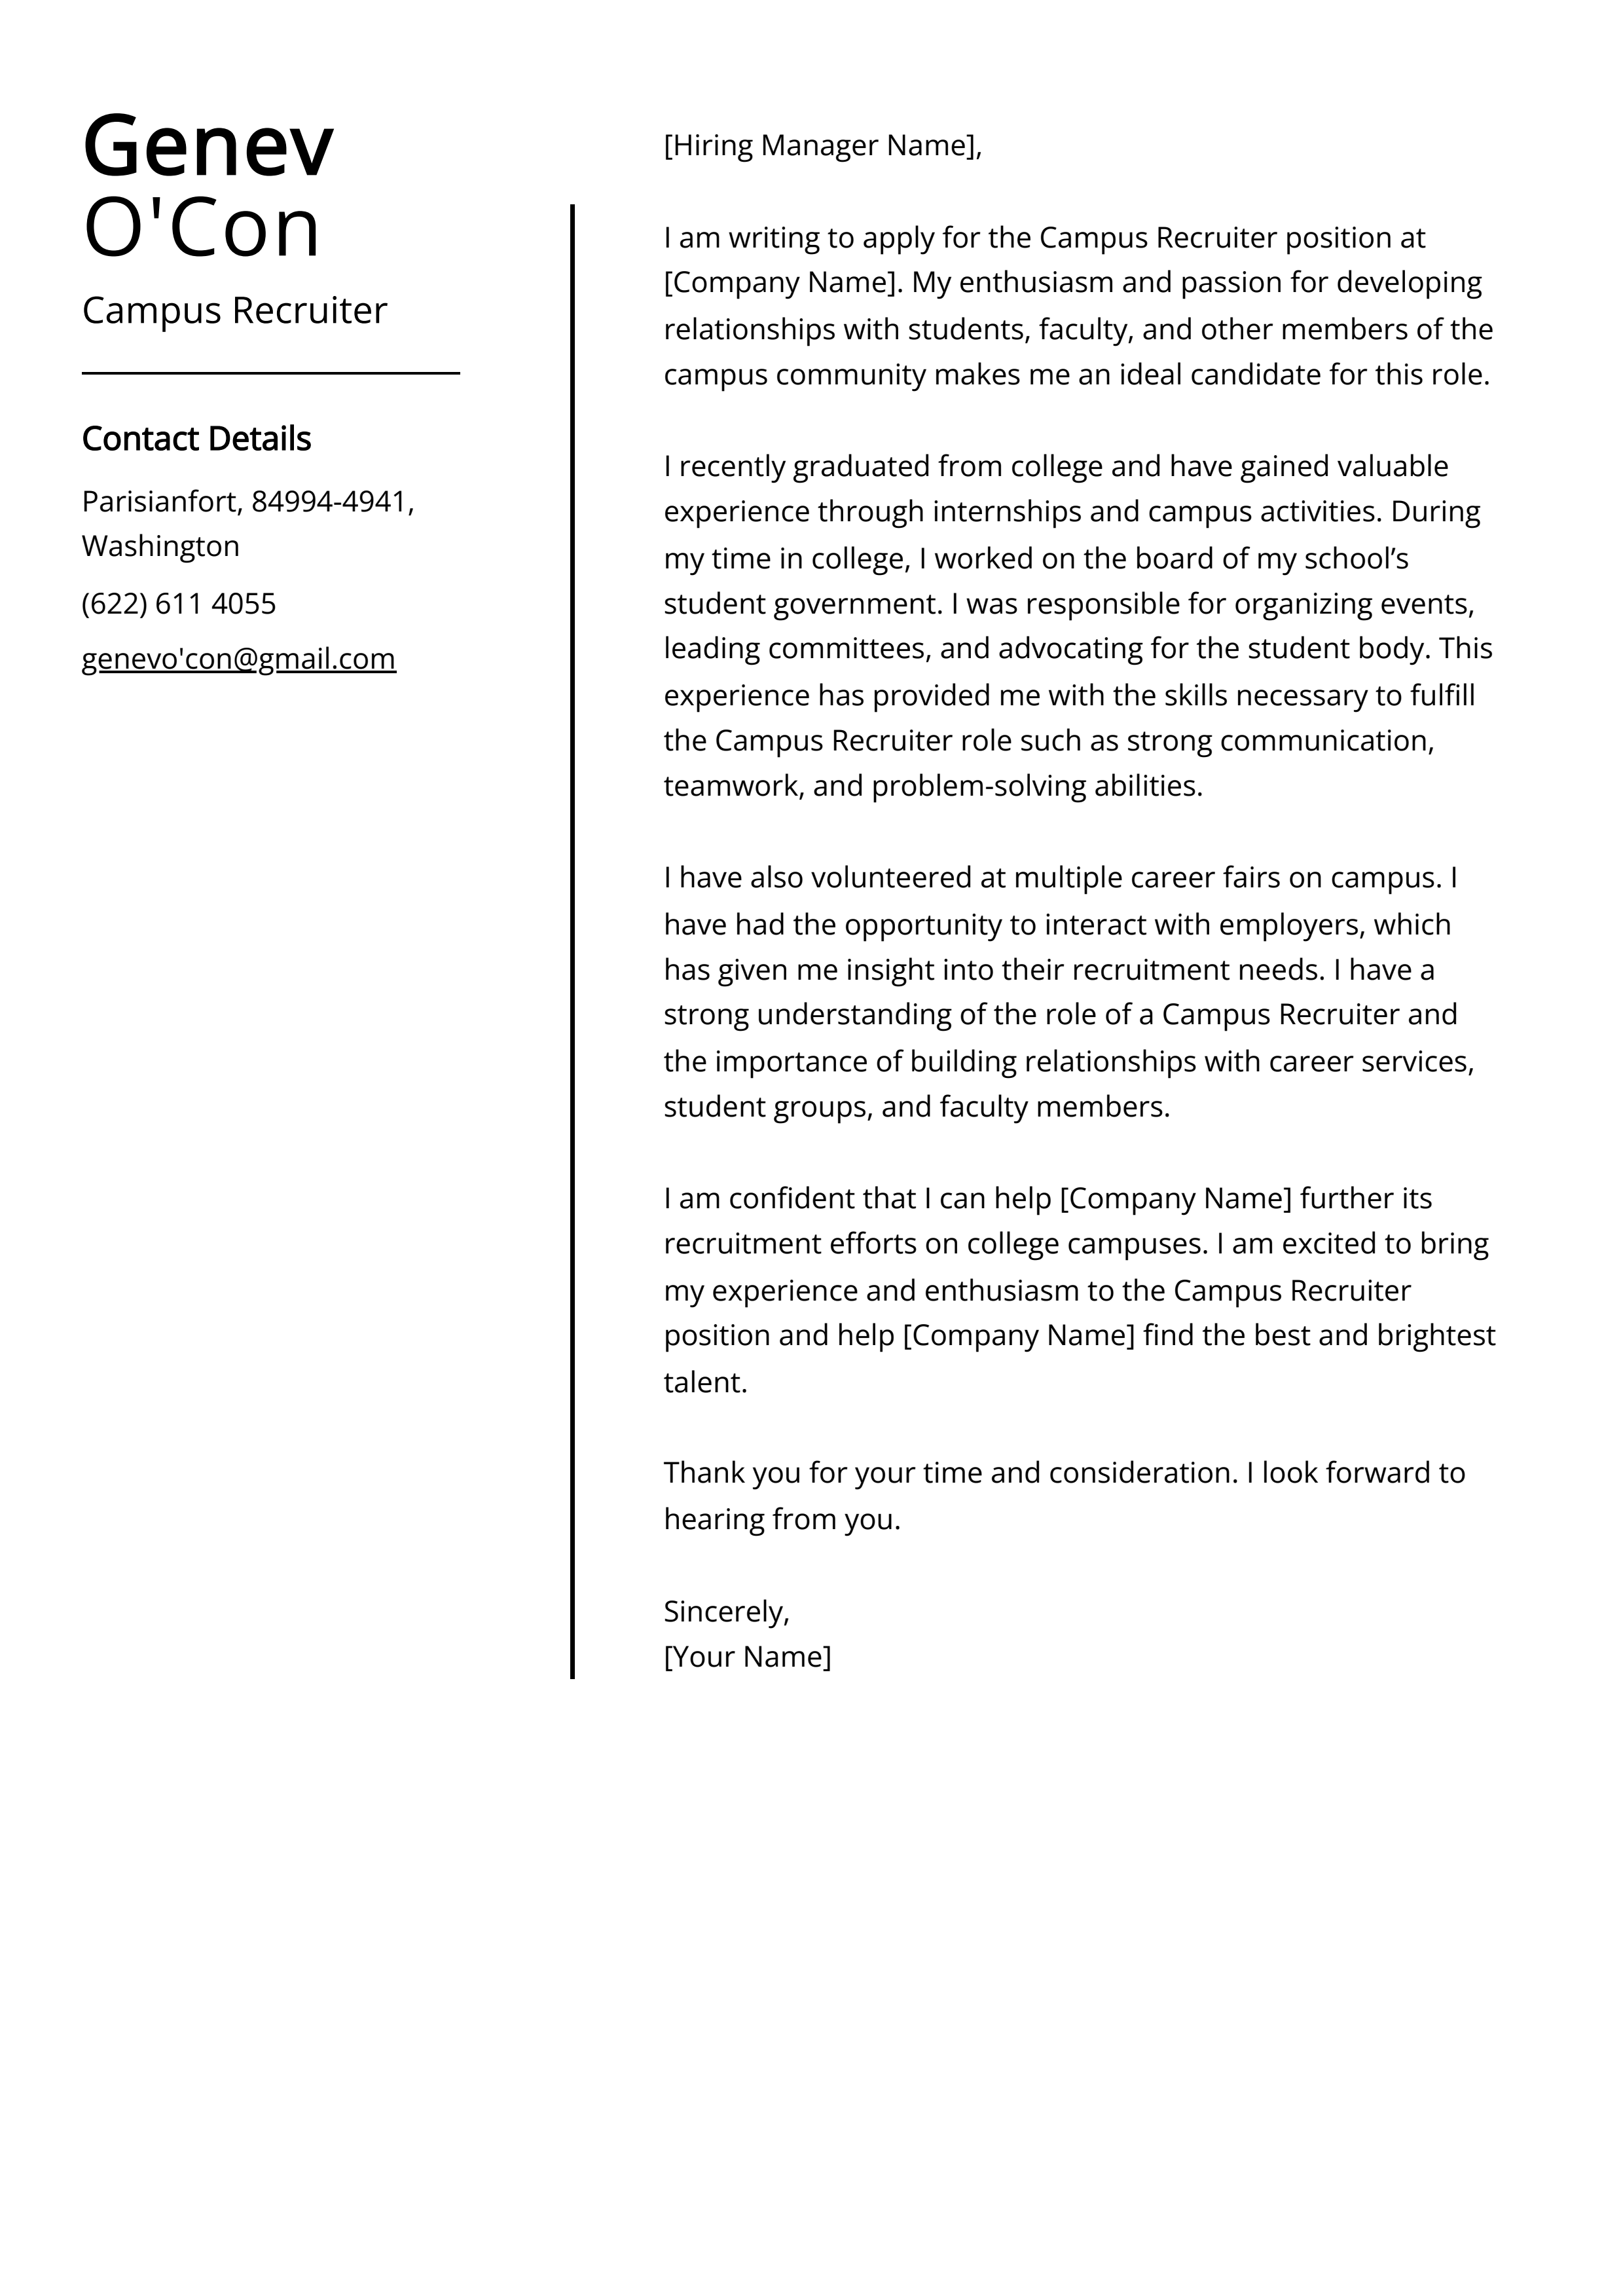 Campus Recruiter Cover Letter Example